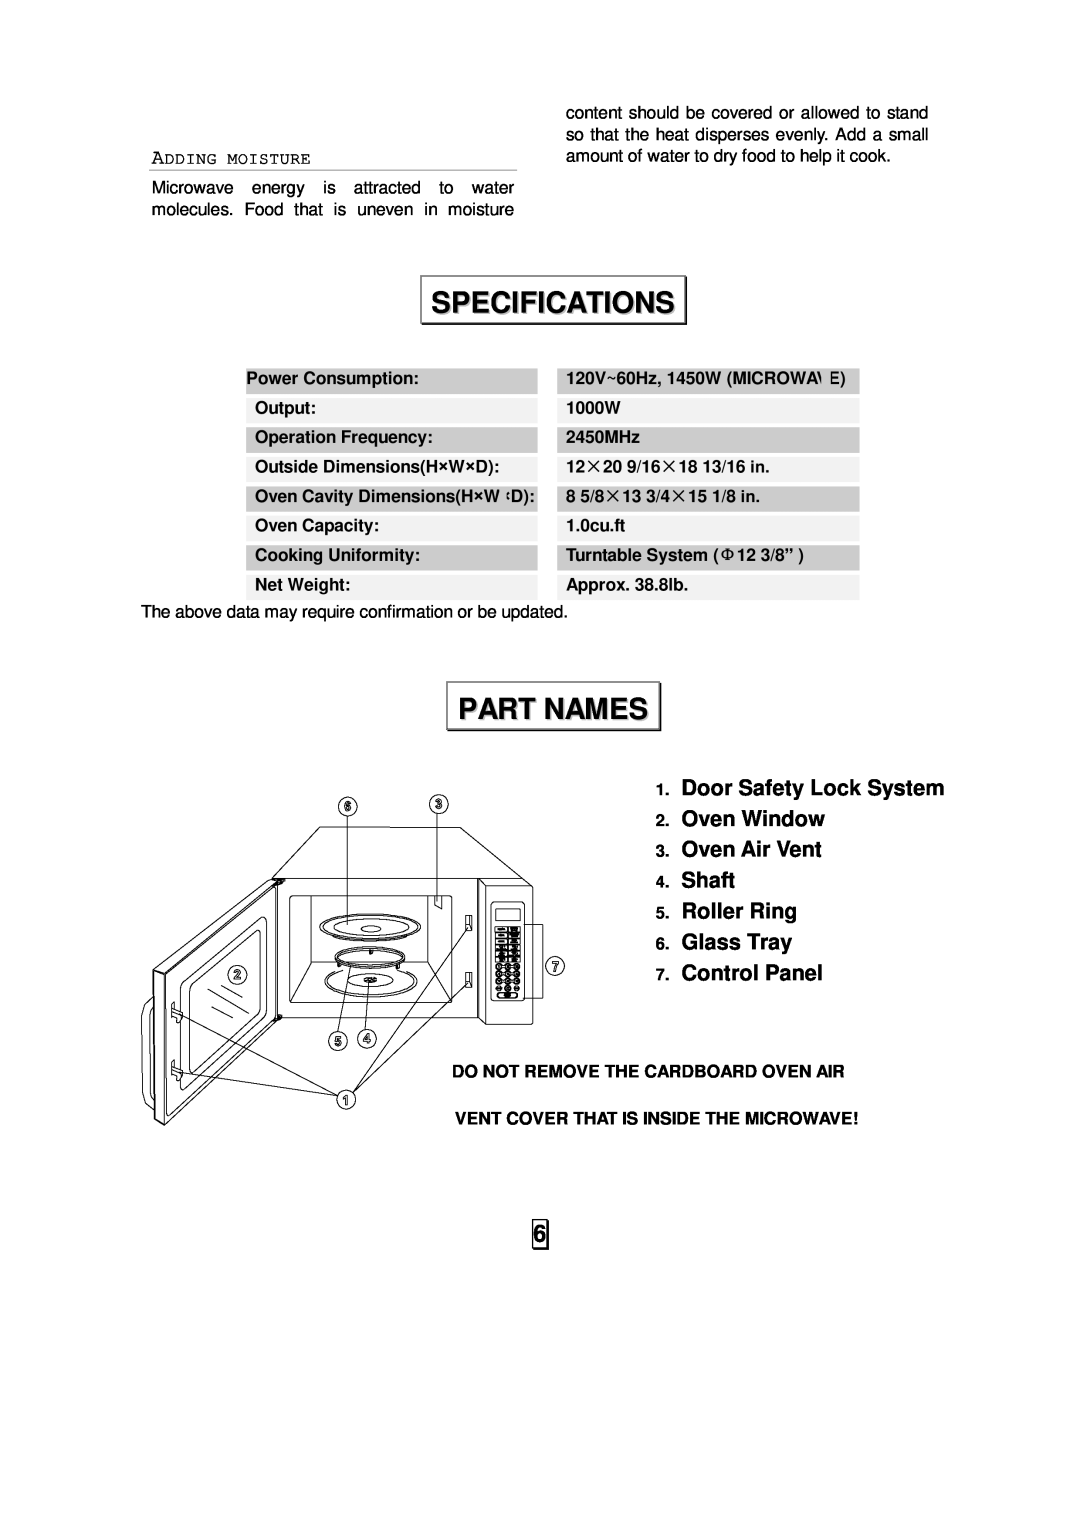 Sunbeam SMW992 Specifications, Part Names, Door Safety Lock System 2. Oven Window, Oven Air Vent 4. Shaft 5. Roller Ring 